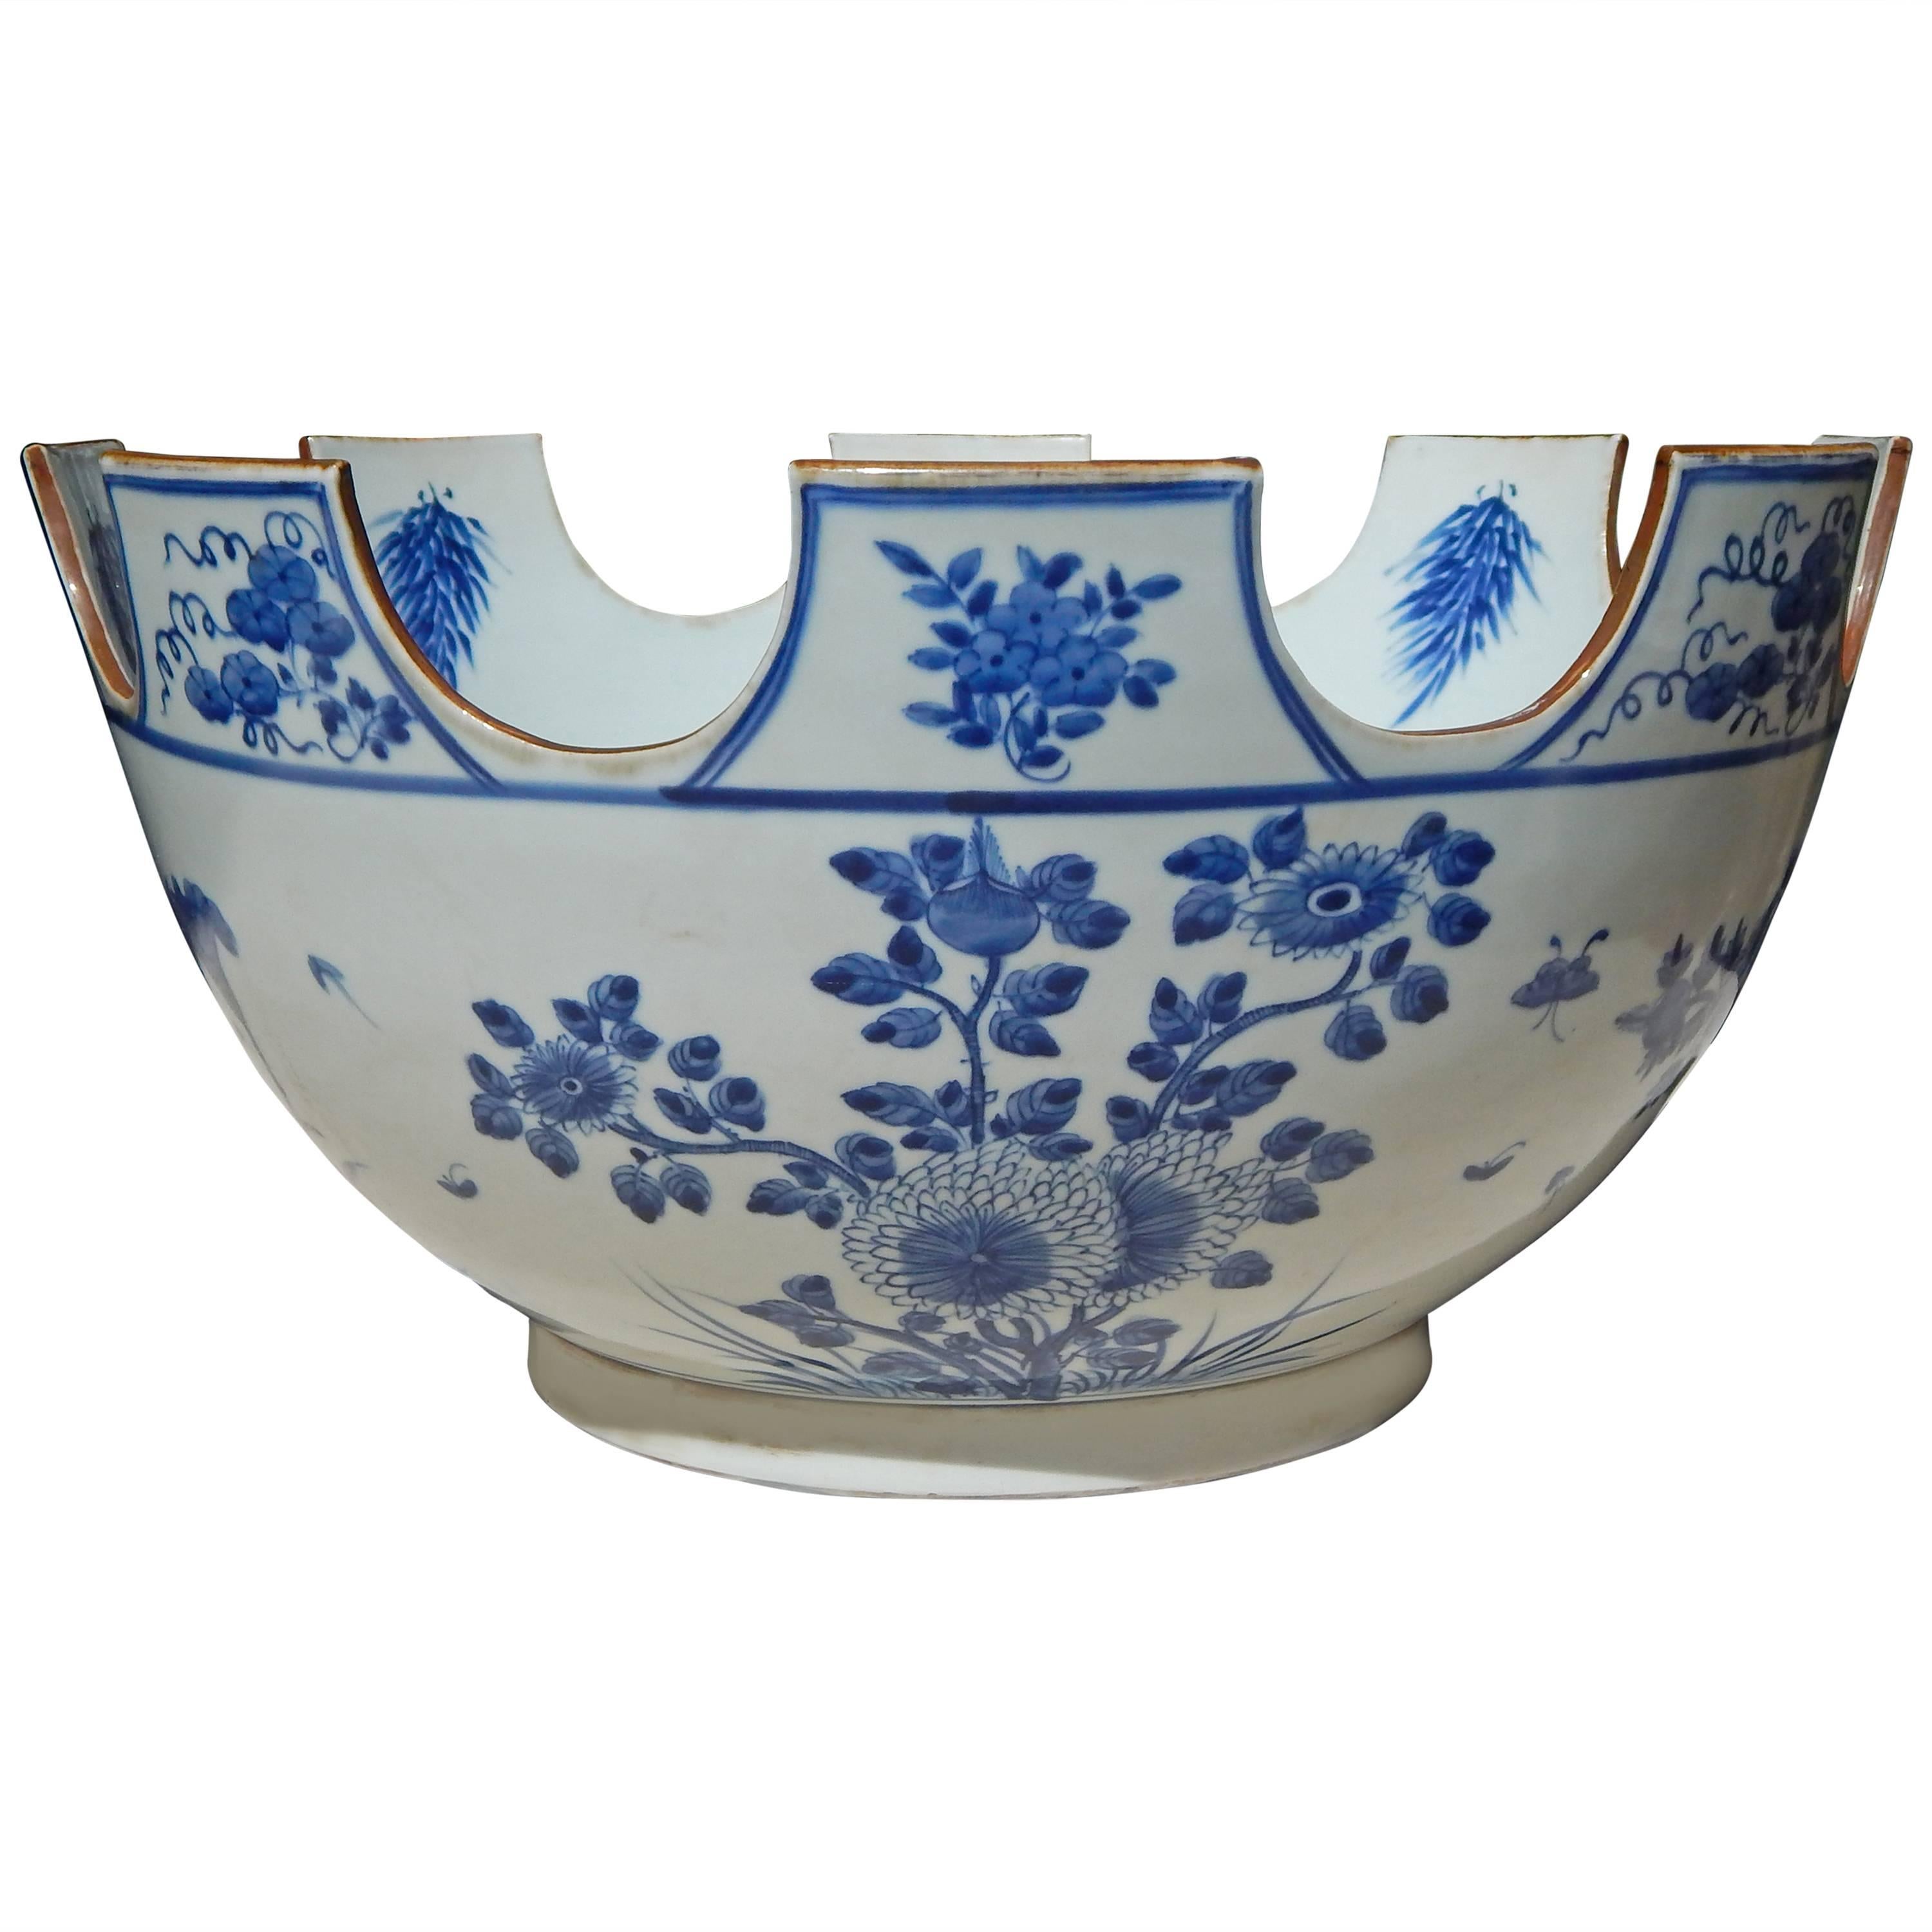  Blue and White Chinese Export Monteith Bowl 